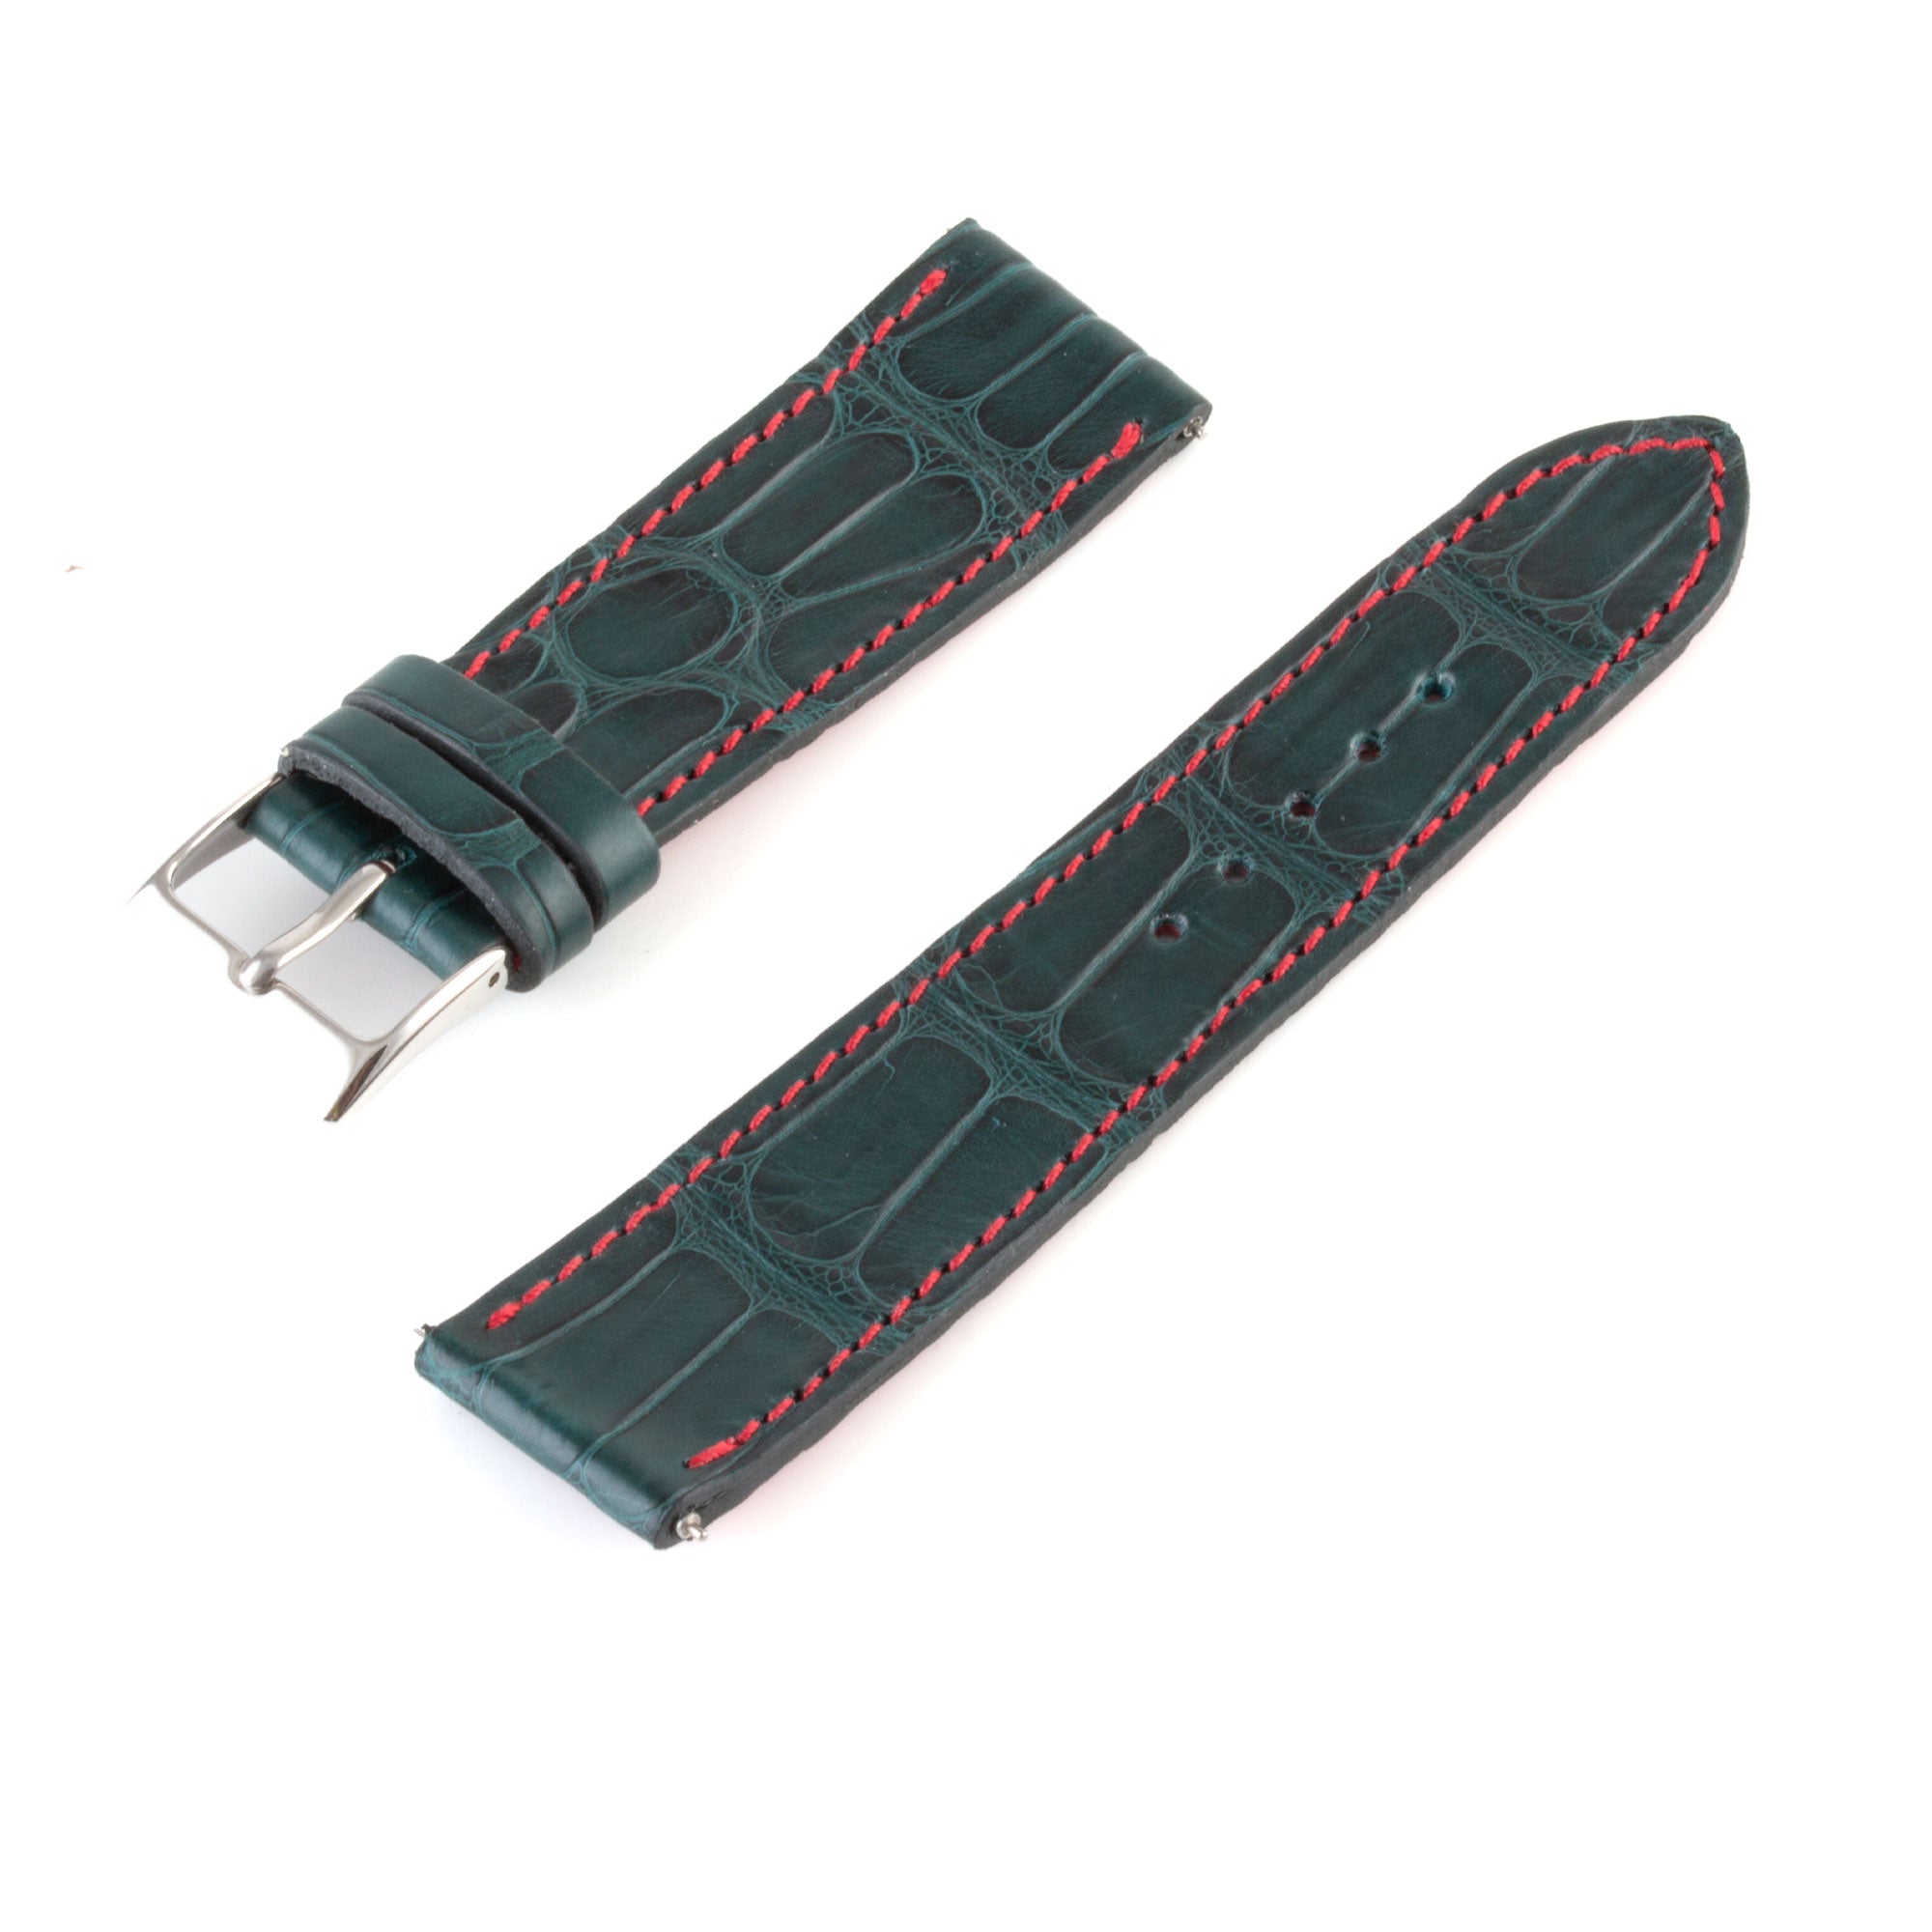 Alligator "Solo" leather watch band - 21mm width (0.83 inches) / Size M (n° 4)